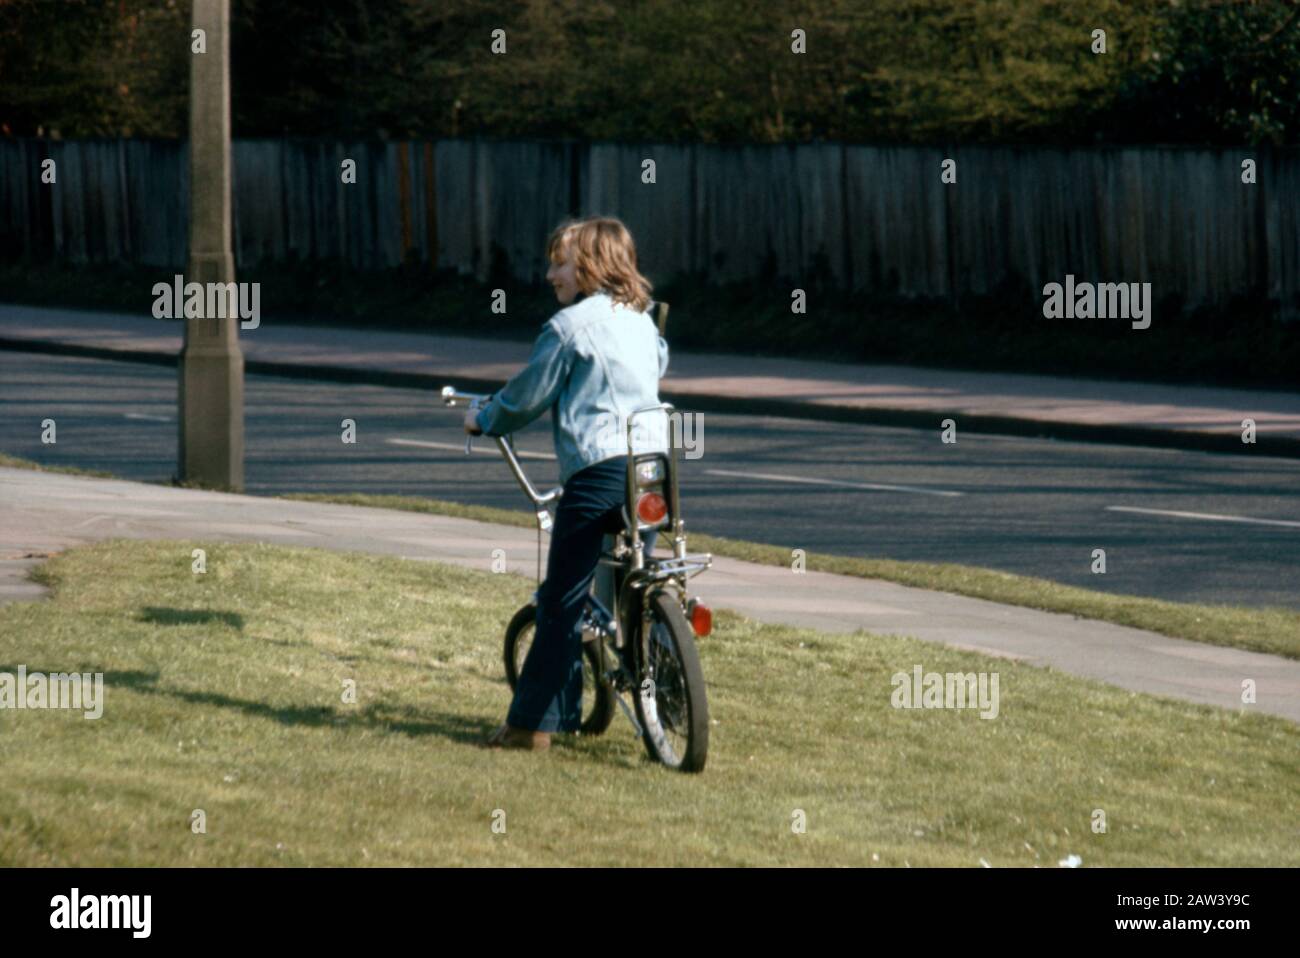 An 11 year old boy riding his new an American export Raleigh Chopper bike in 1973 in the suburbs of London UK. Stock Photo